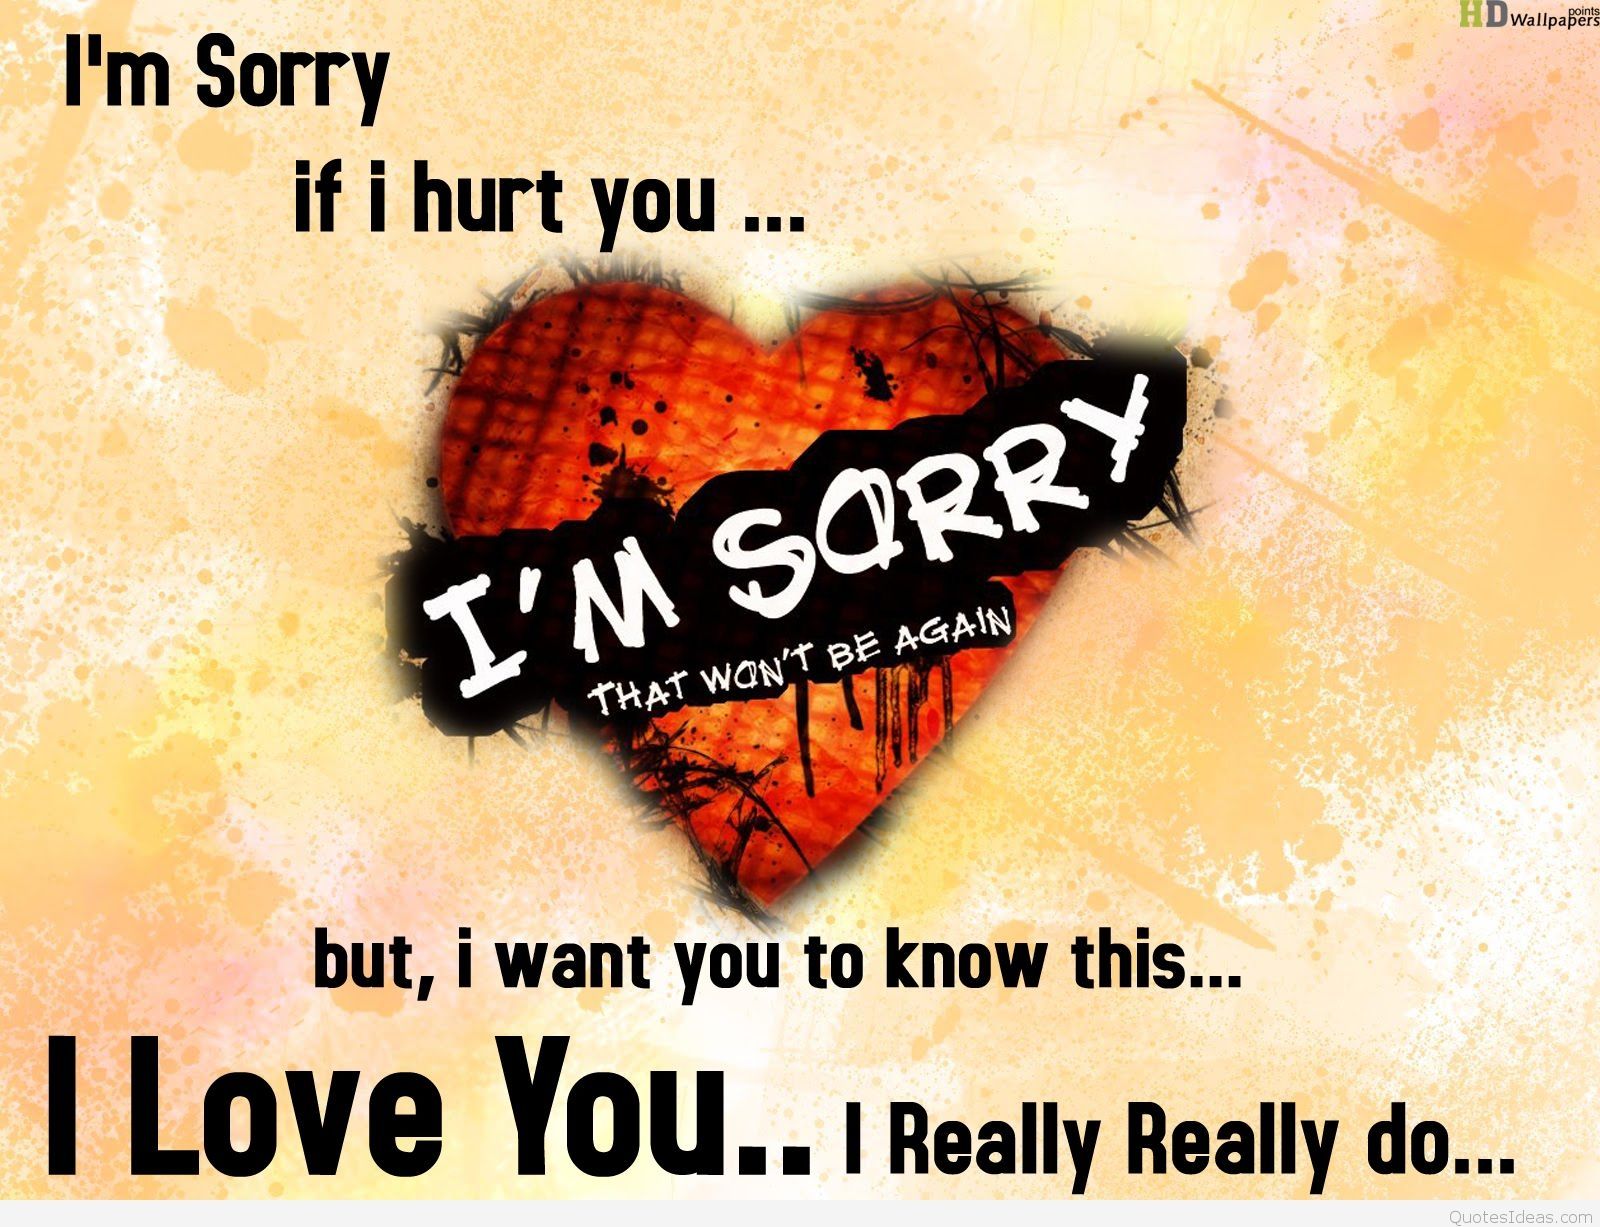 i-m-sorry-wallpapers-wallpaper-cave